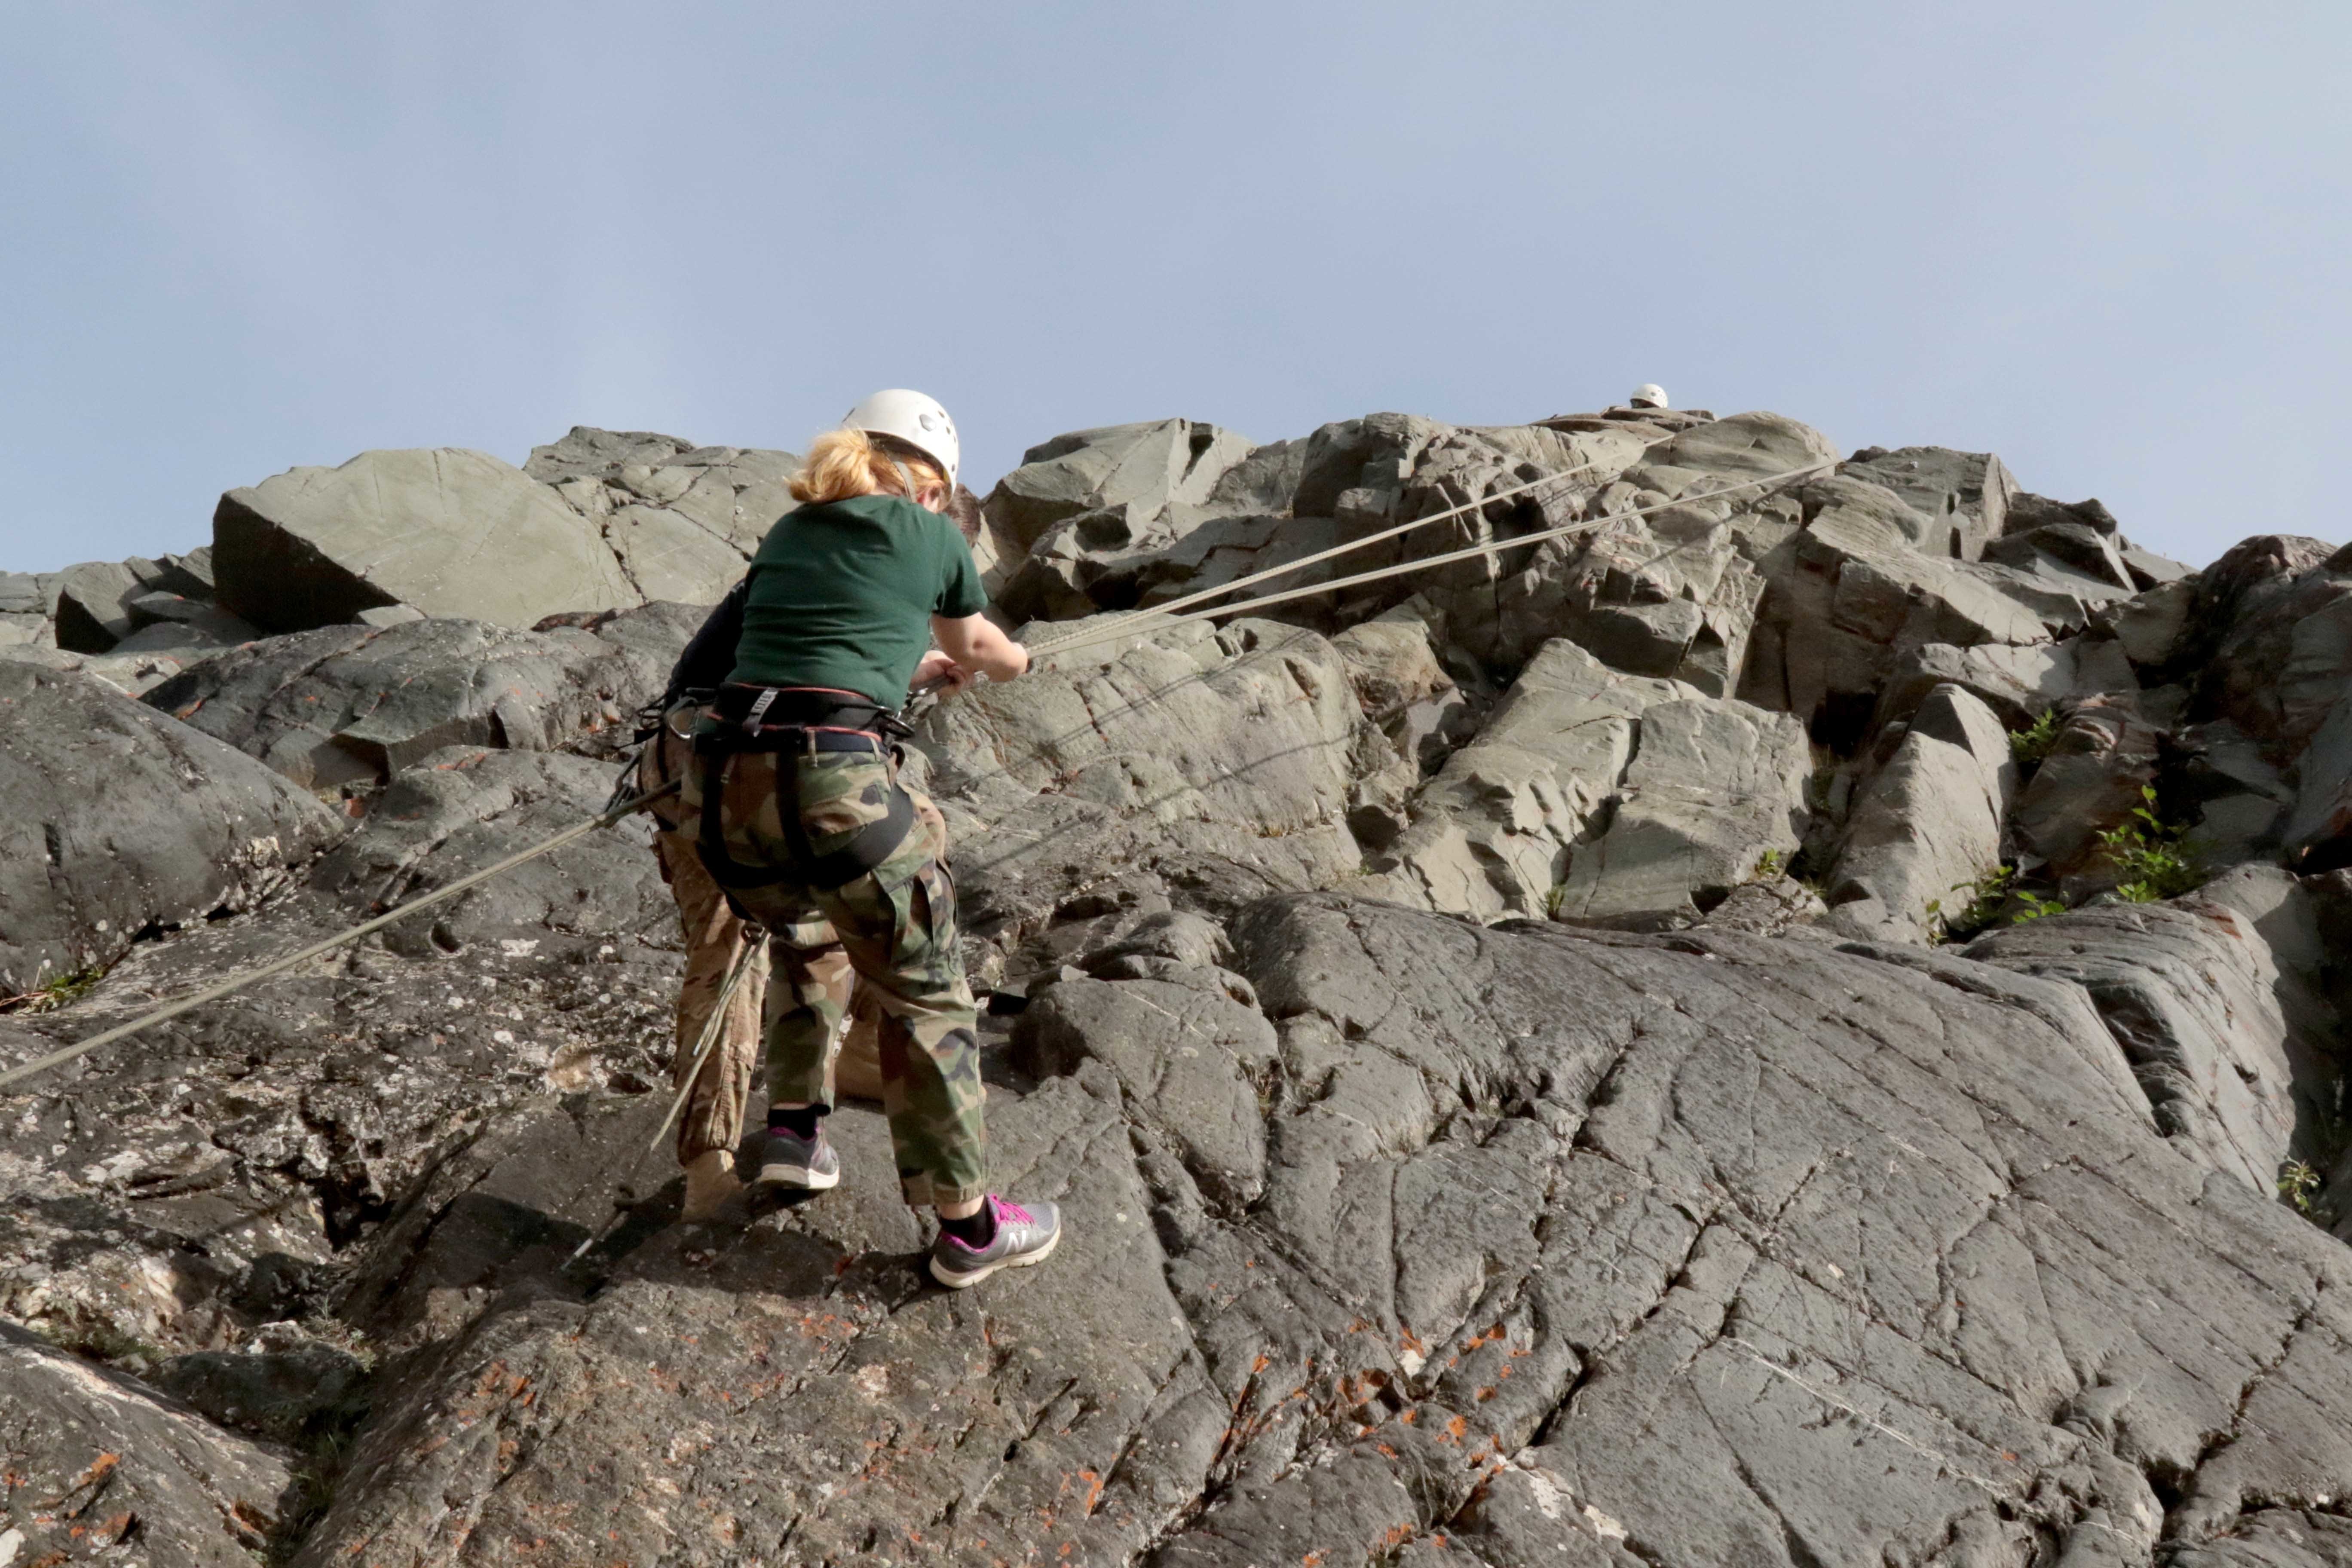 Eielson JROTC cadets learn basic mountaineering at Black Rapids